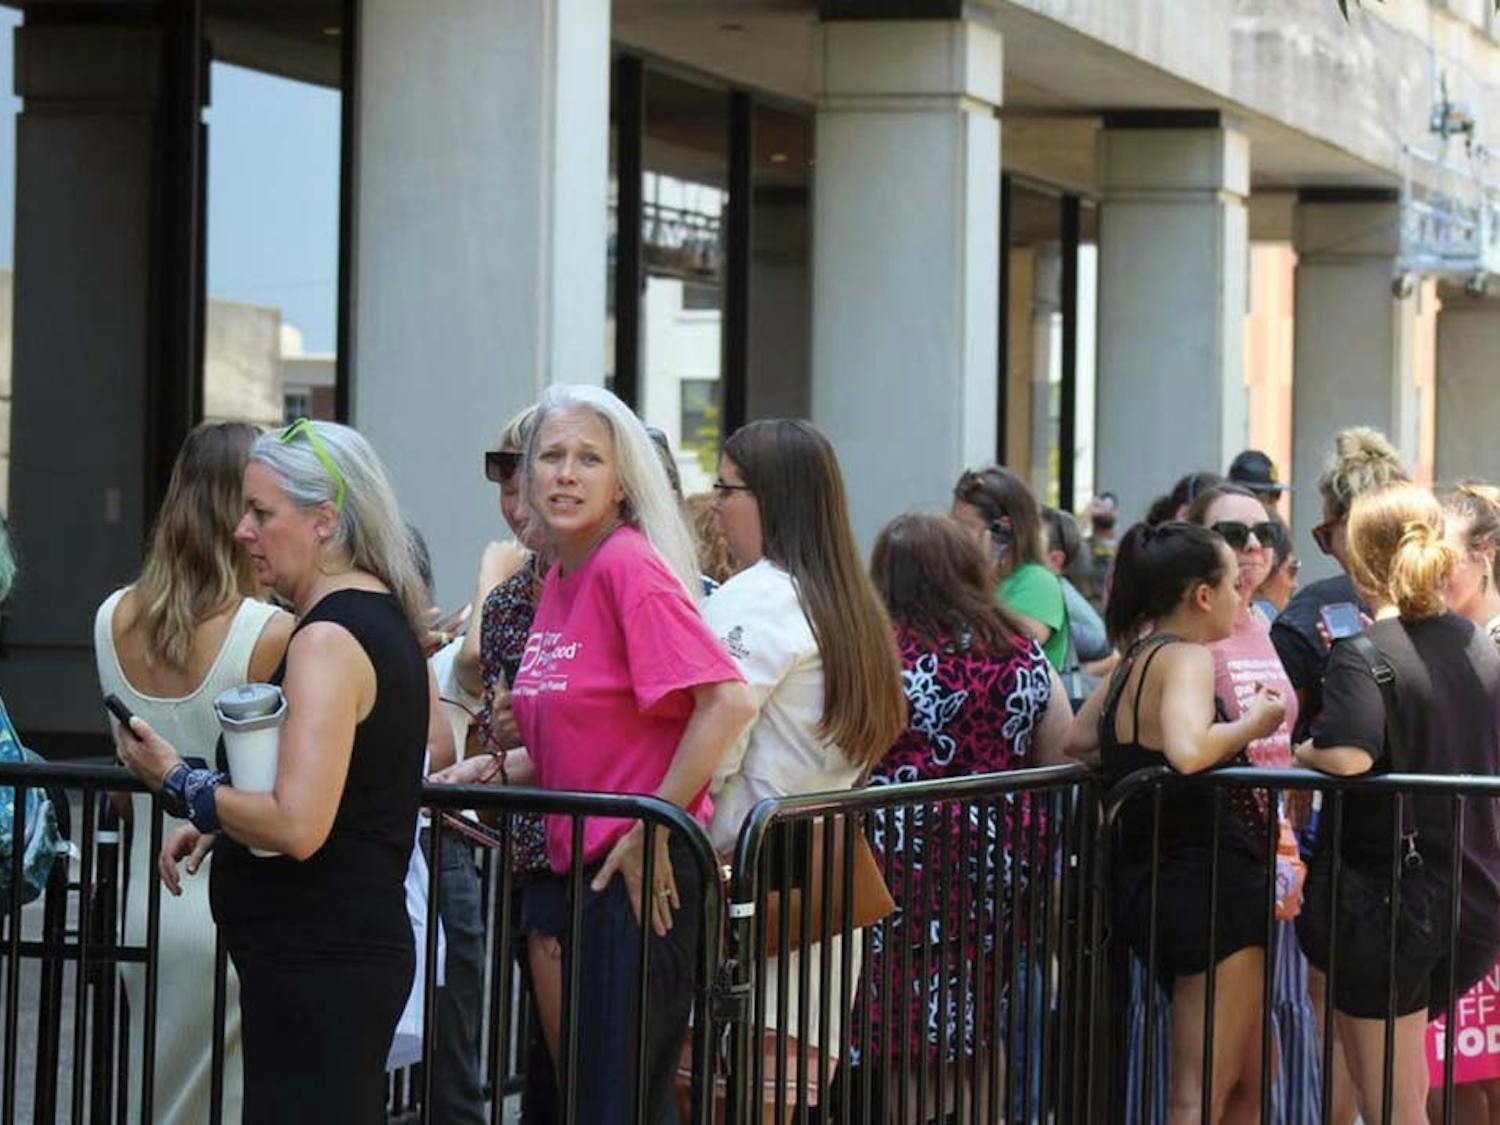 A crowd gathered outside the building where a special House committee met to decide the future of abortion in South Carolina. The committee heard testimony from the public July 7, 2022.